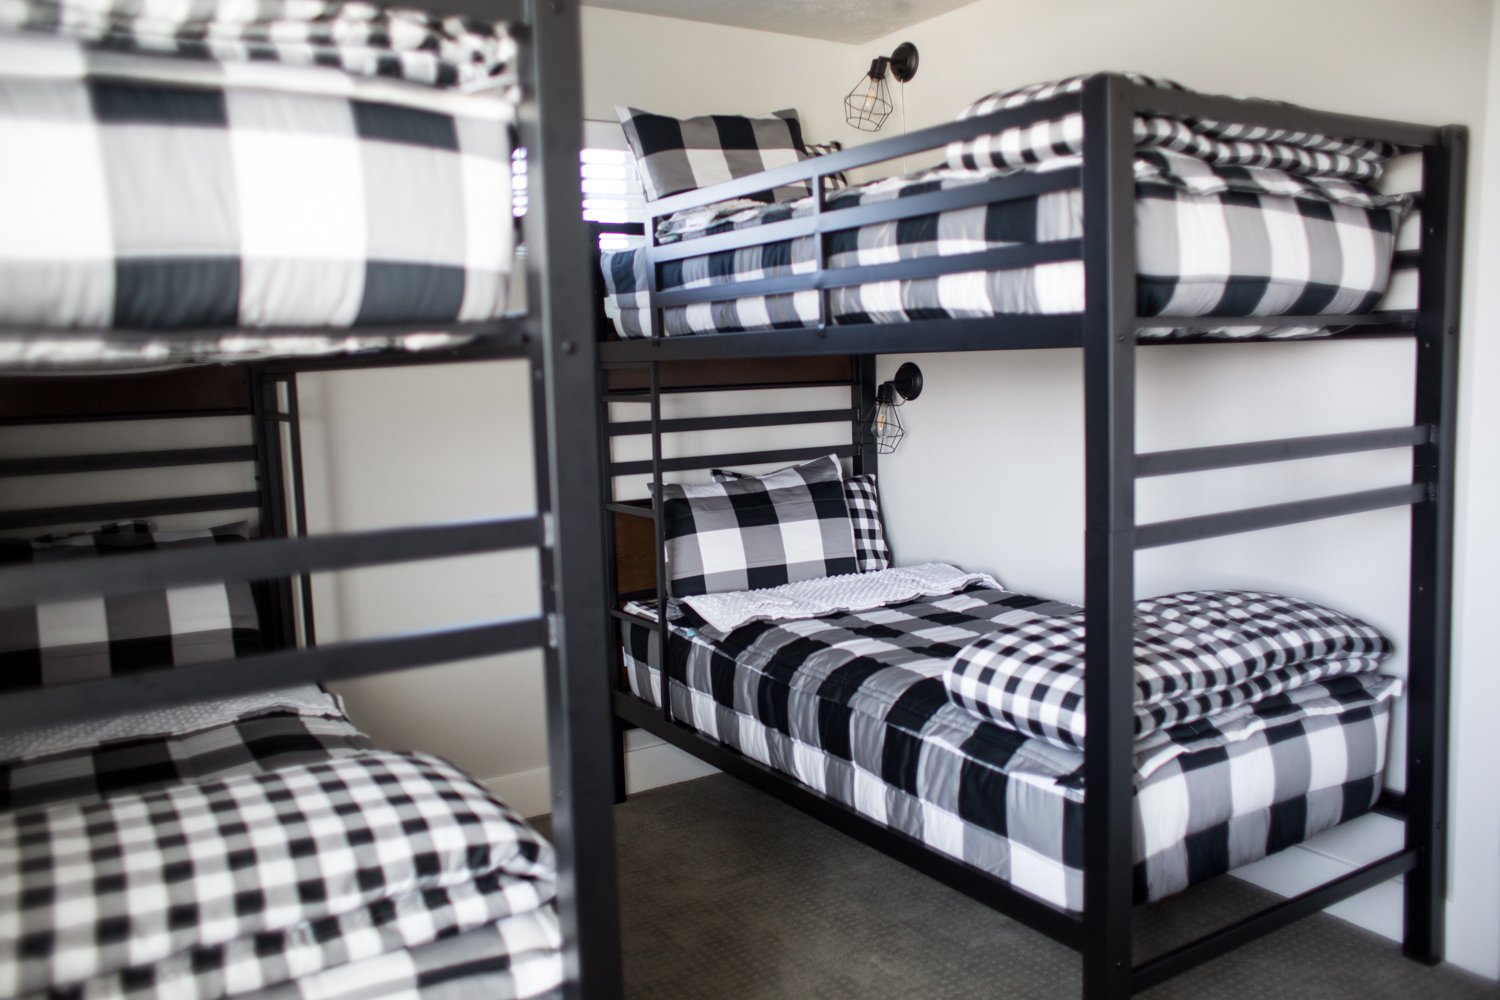 How To Make A Bunkbed In Less Than 5, Easy Way To Make Up Bunk Beds